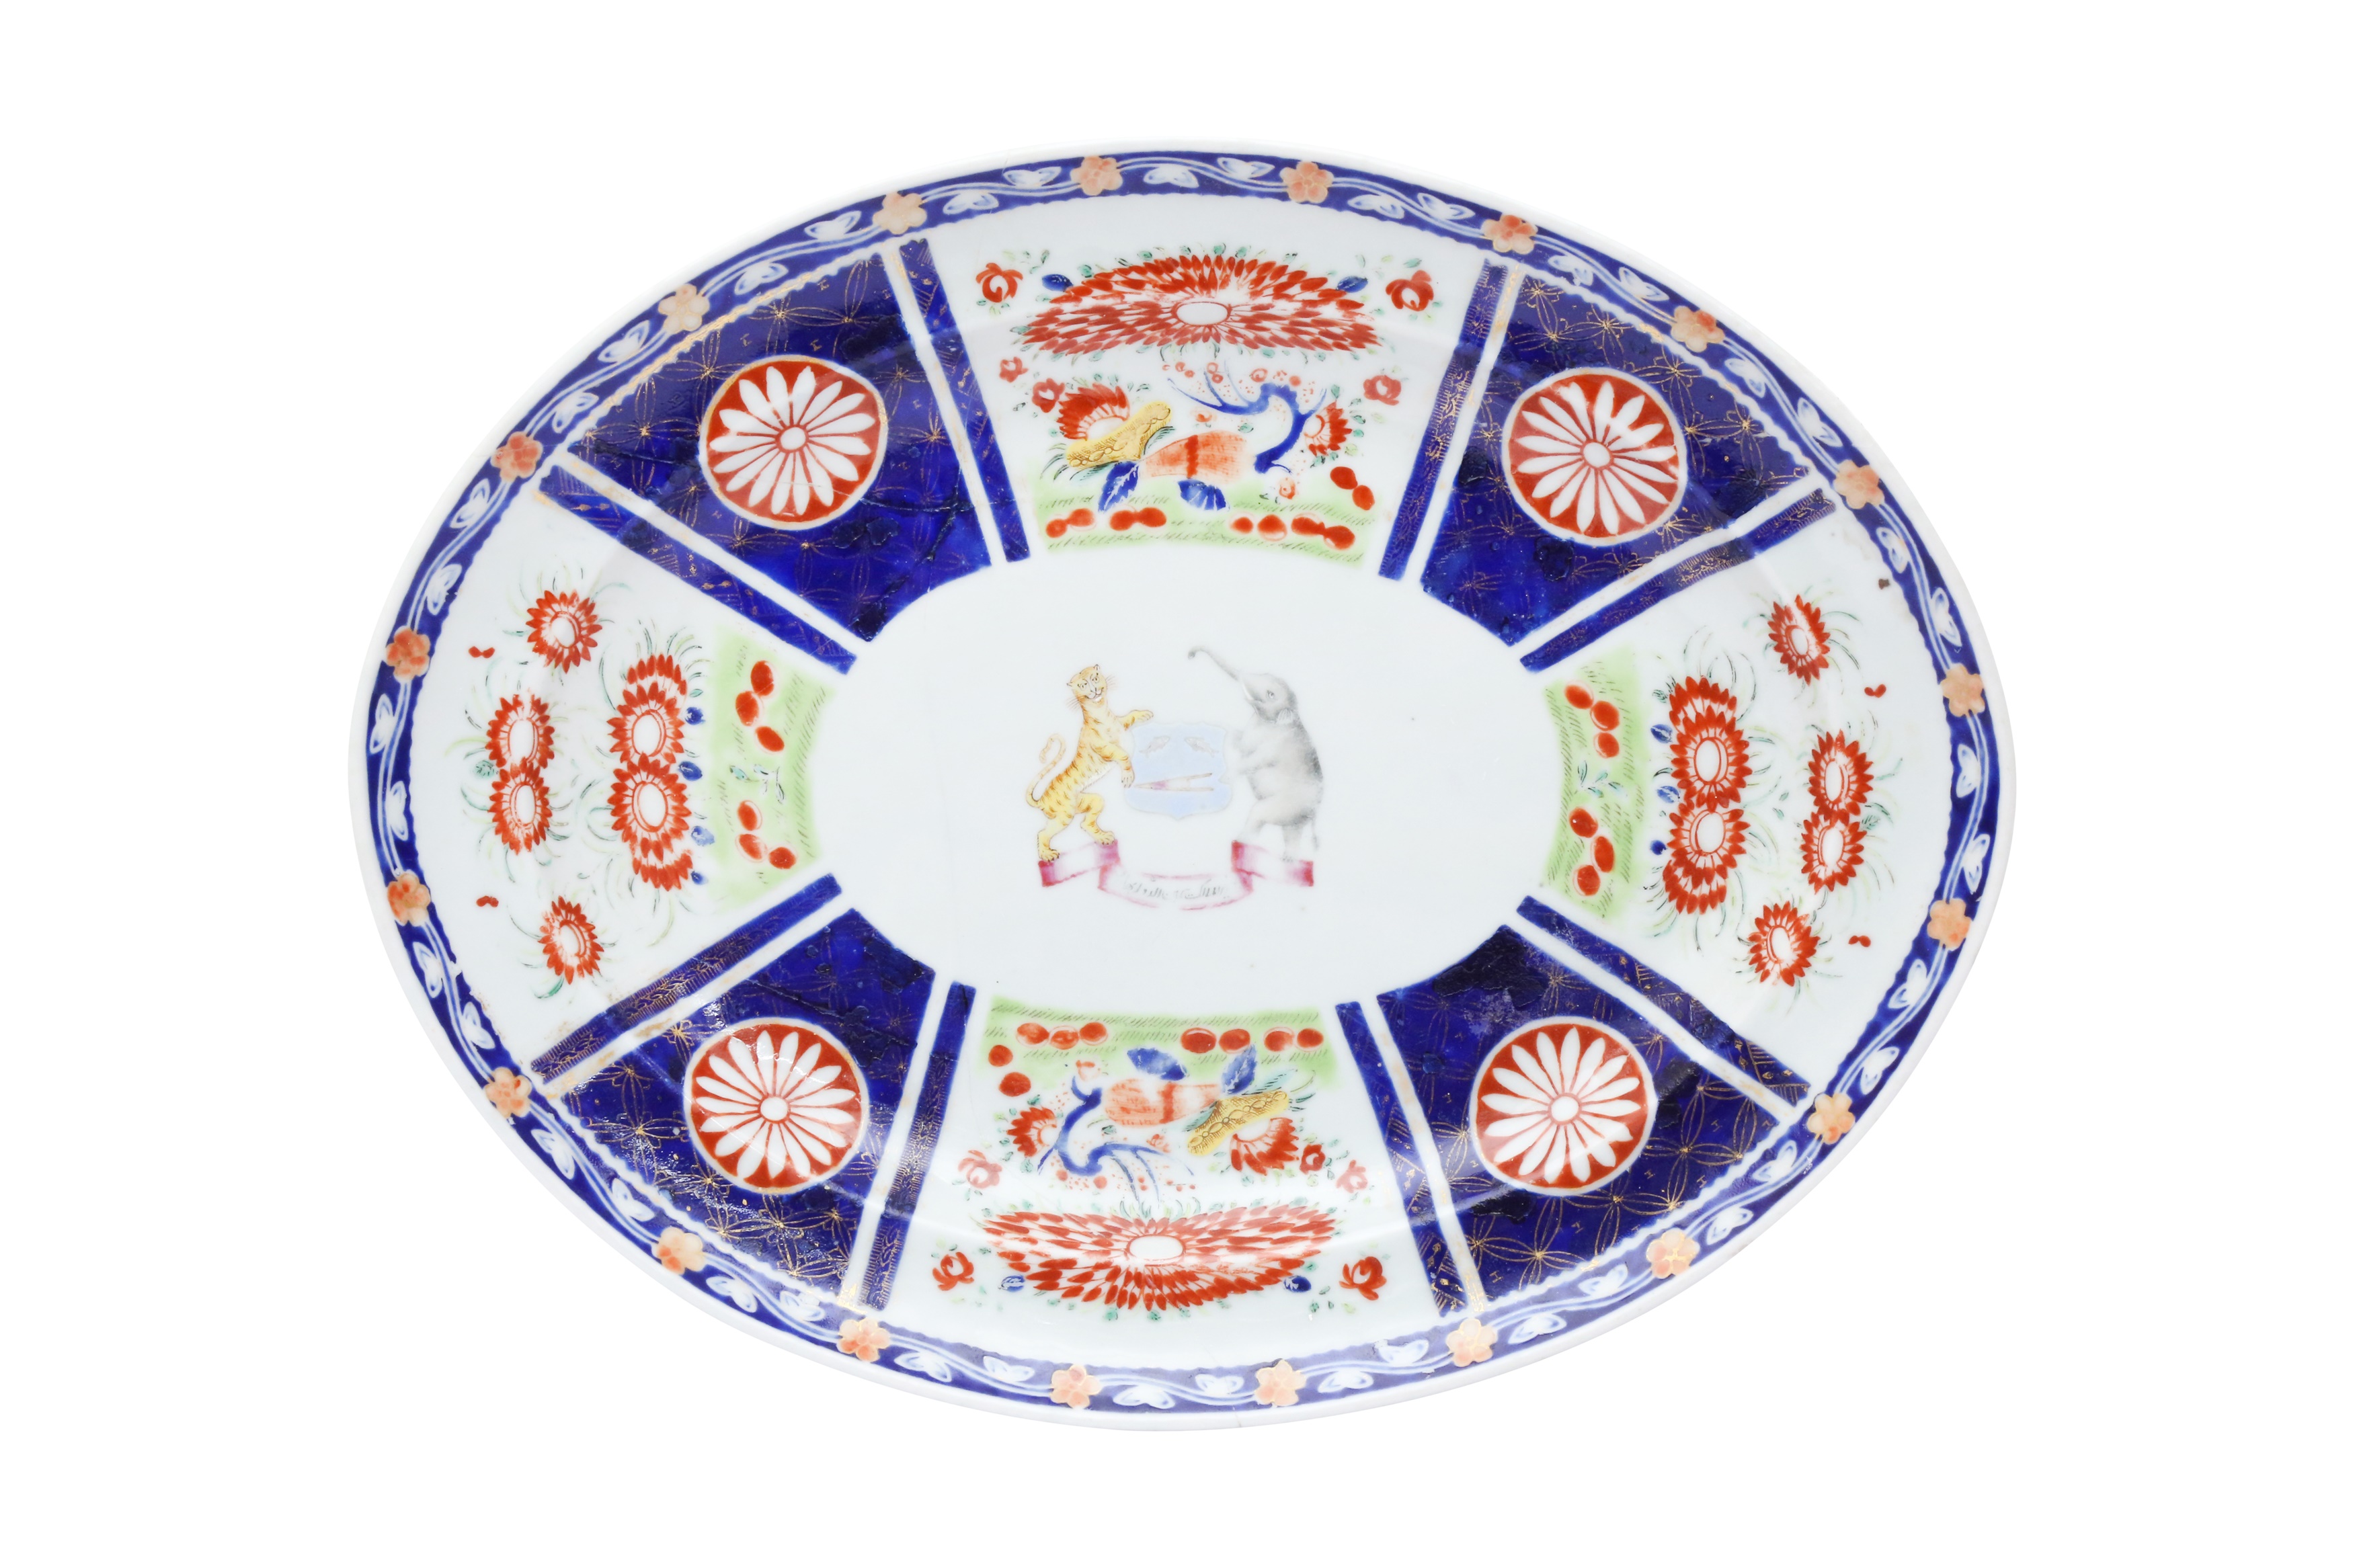 A CHINESE EXPORT ARMORIAL OVAL DISH FOR THE INDIAN MARKET 清十九世紀 約1820年 外銷粉彩繪徽章紋盤